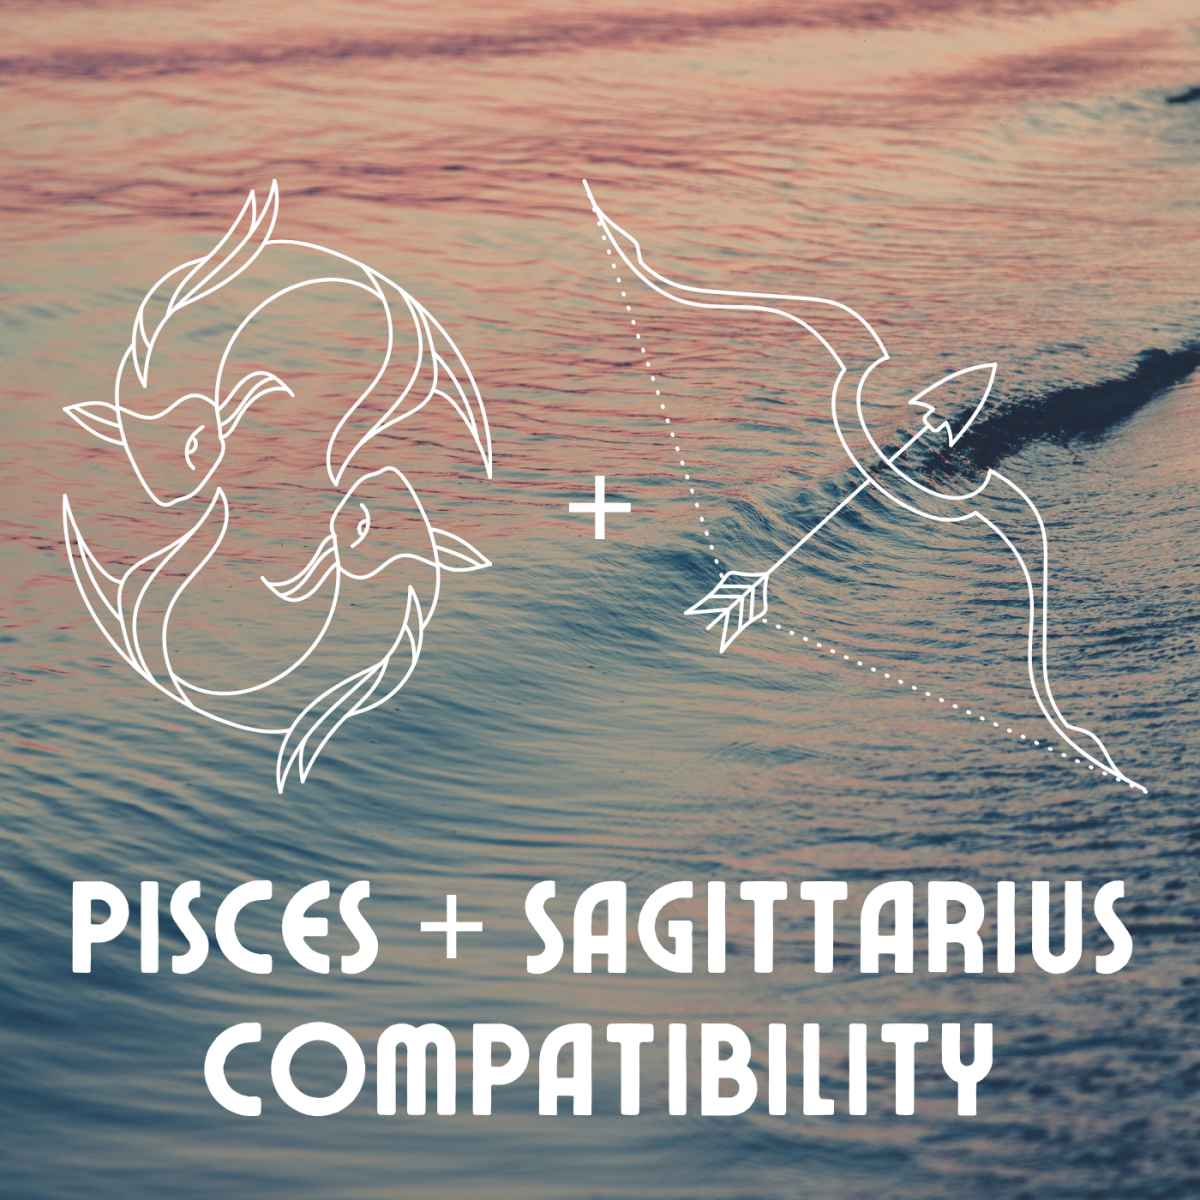 Do Sagittarius and Pisces Get Along or Not?